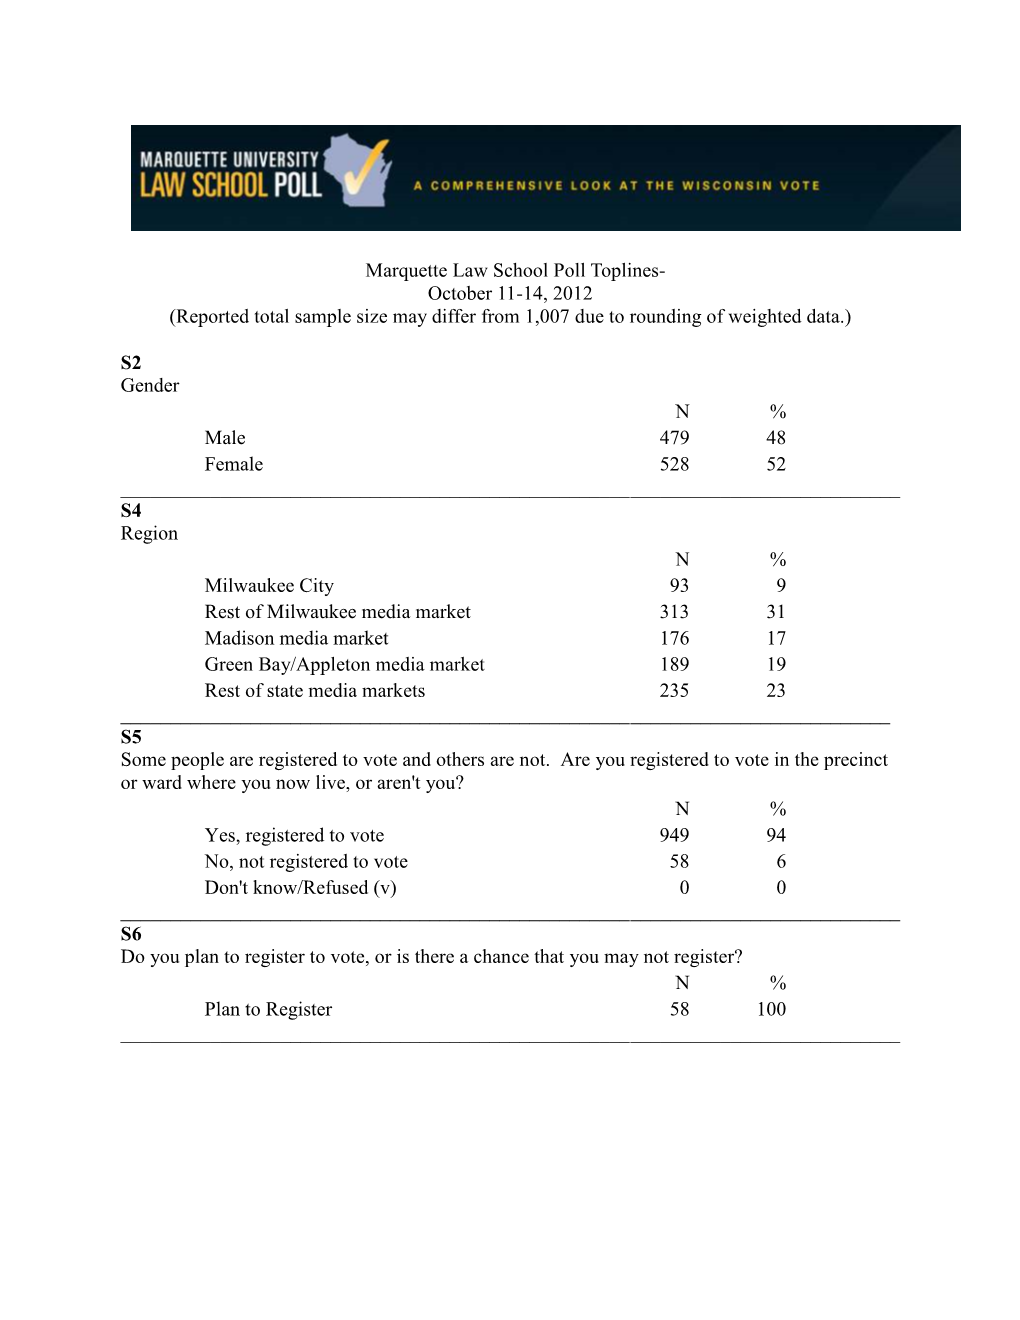 Marquette Law School Poll, October 11-14 Topline Results For